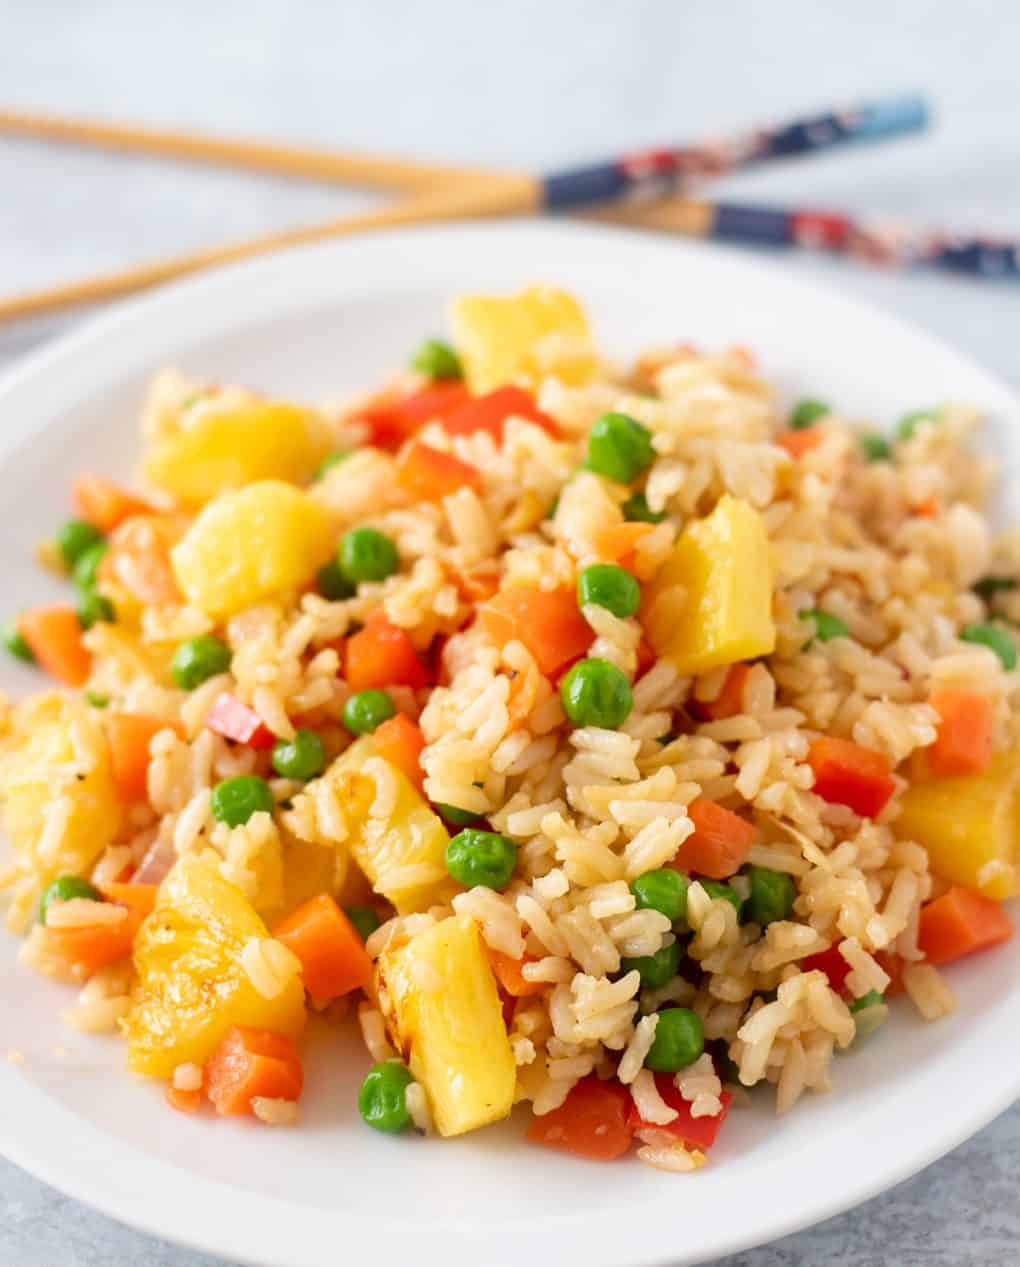 pineapple fried rice on a white plate with chopsticks beside the plate for serving.